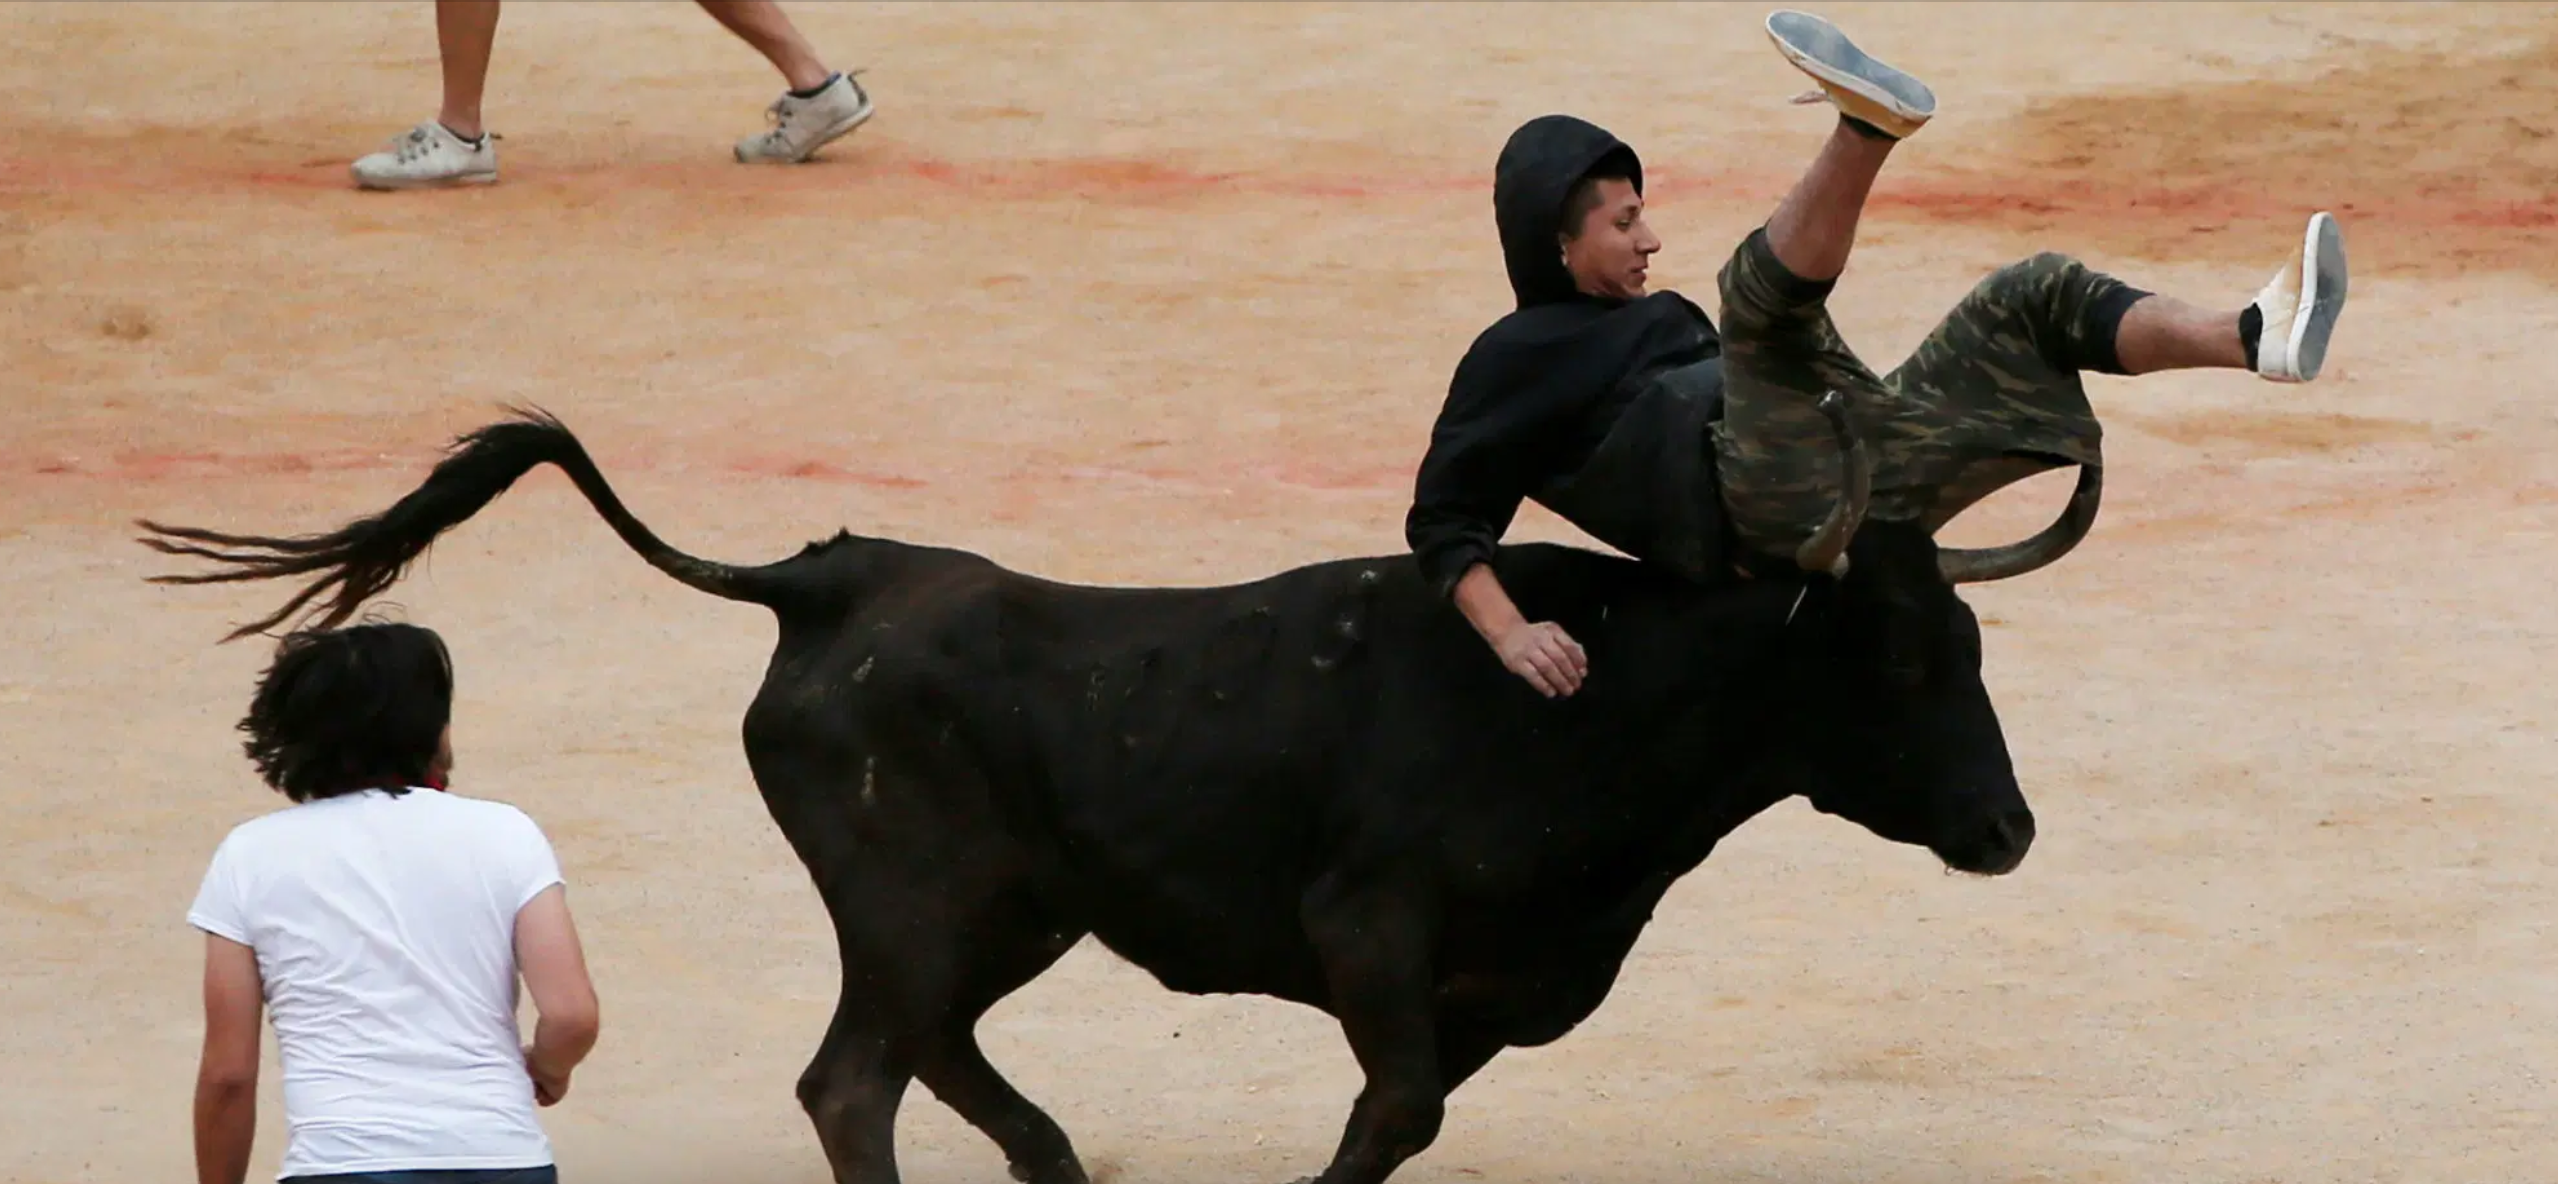 a person is thrown into the air by a bull